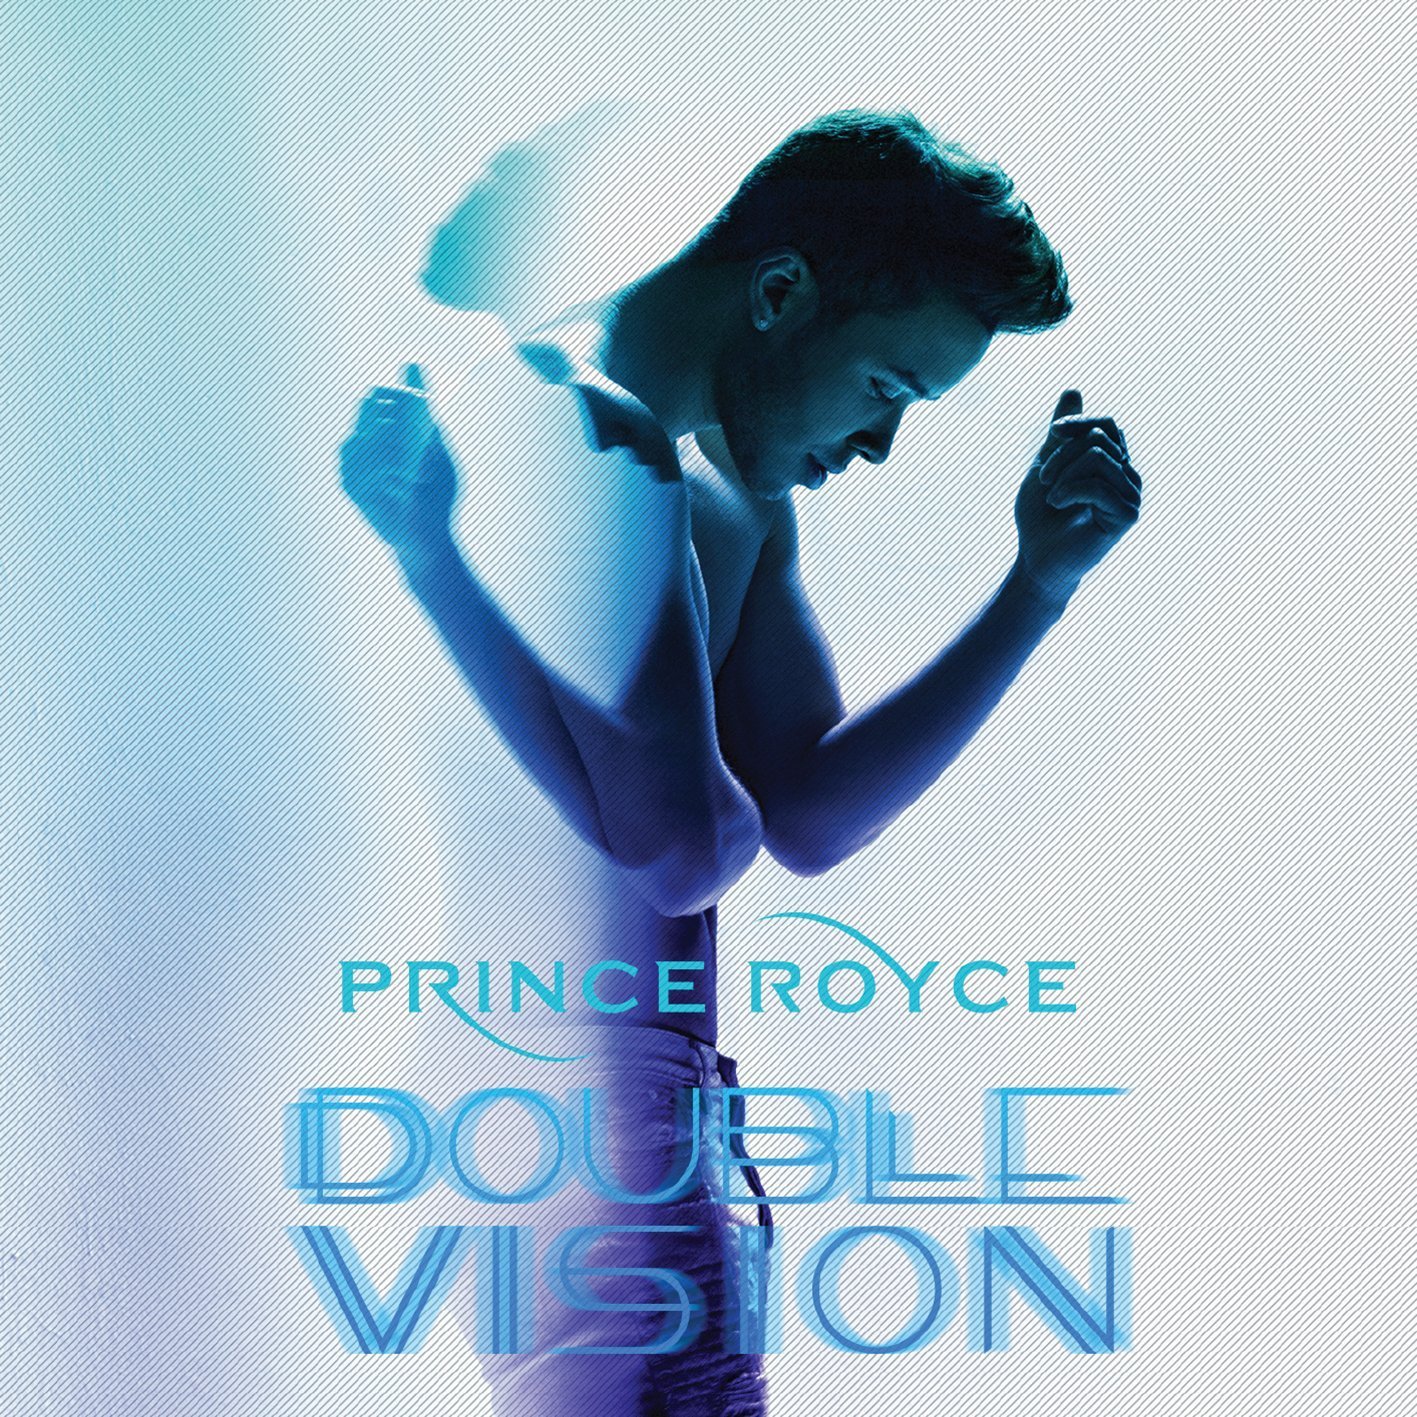 Prince Royce - Double Vision {Deluxe Edition} (2015) [HDTracks FLAC 24bit/44,1kHz]